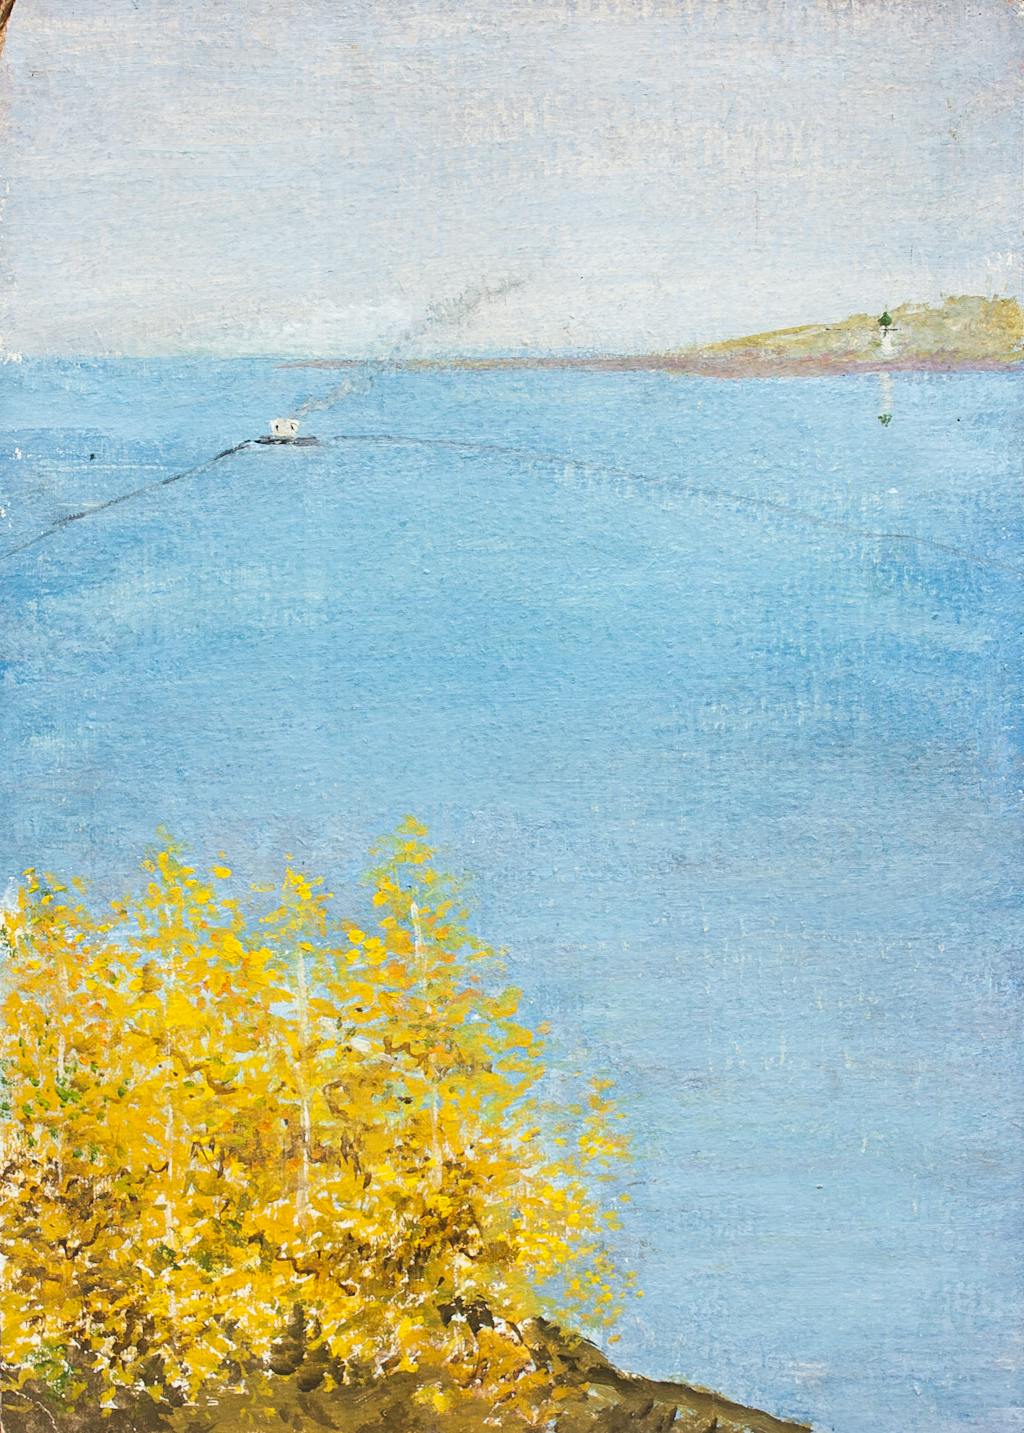 Painting "At the Volga", painted by Elena Birkenwald in 1983